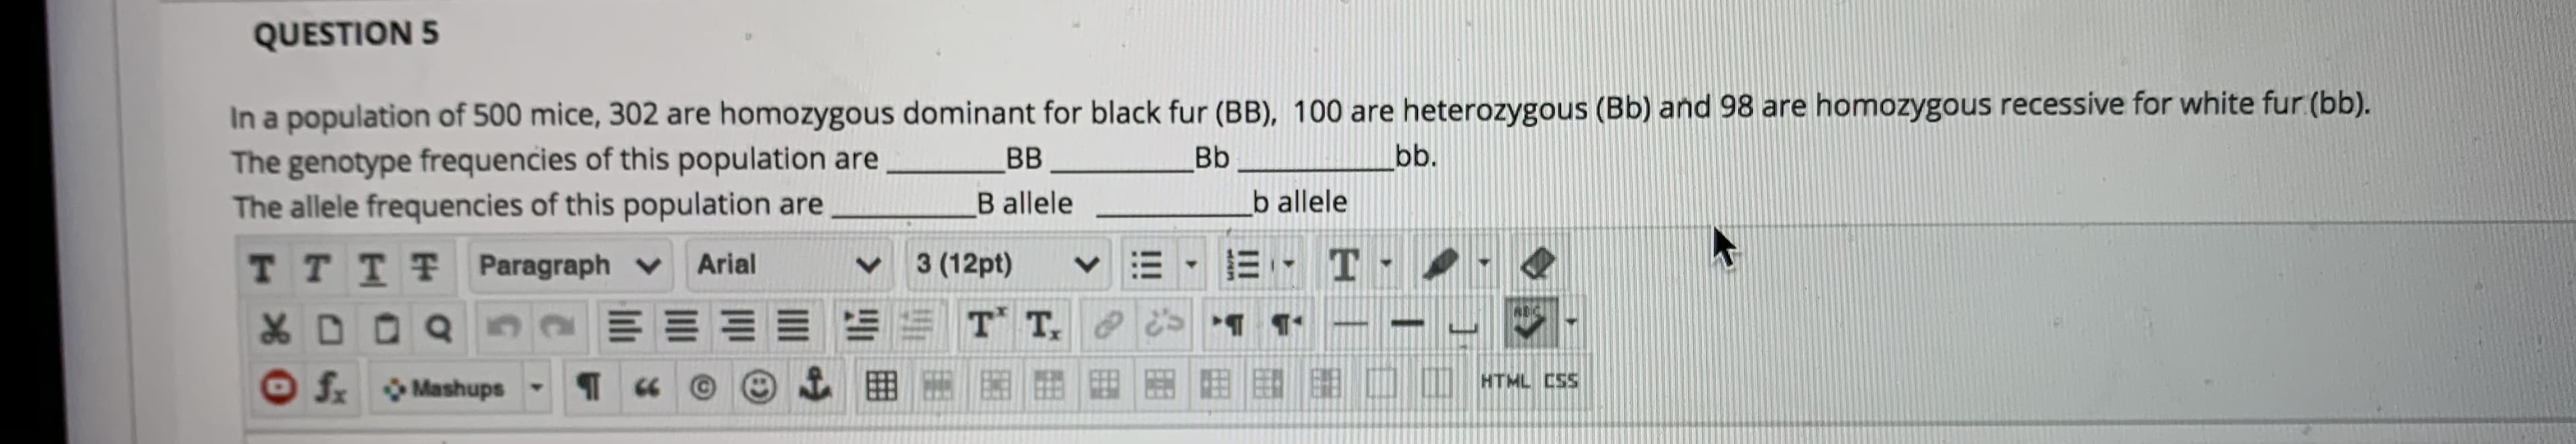 QUESTION 5
In a population of 500 mice, 302 are homozygous dominant for black fur (BB), 100 are heterozygous (Bb) and 98 are homozygous recessive for white fur (bb).
The genotype frequencies of this population are
The allele frequencies of this population are
BB
Bb
bb.
B allele
b allele
TTTT Paragraph v
3 (12pt)
E- T- .
Arial
EE T T, 1 1
f.
Mashups
田
HTML CSS
匪
